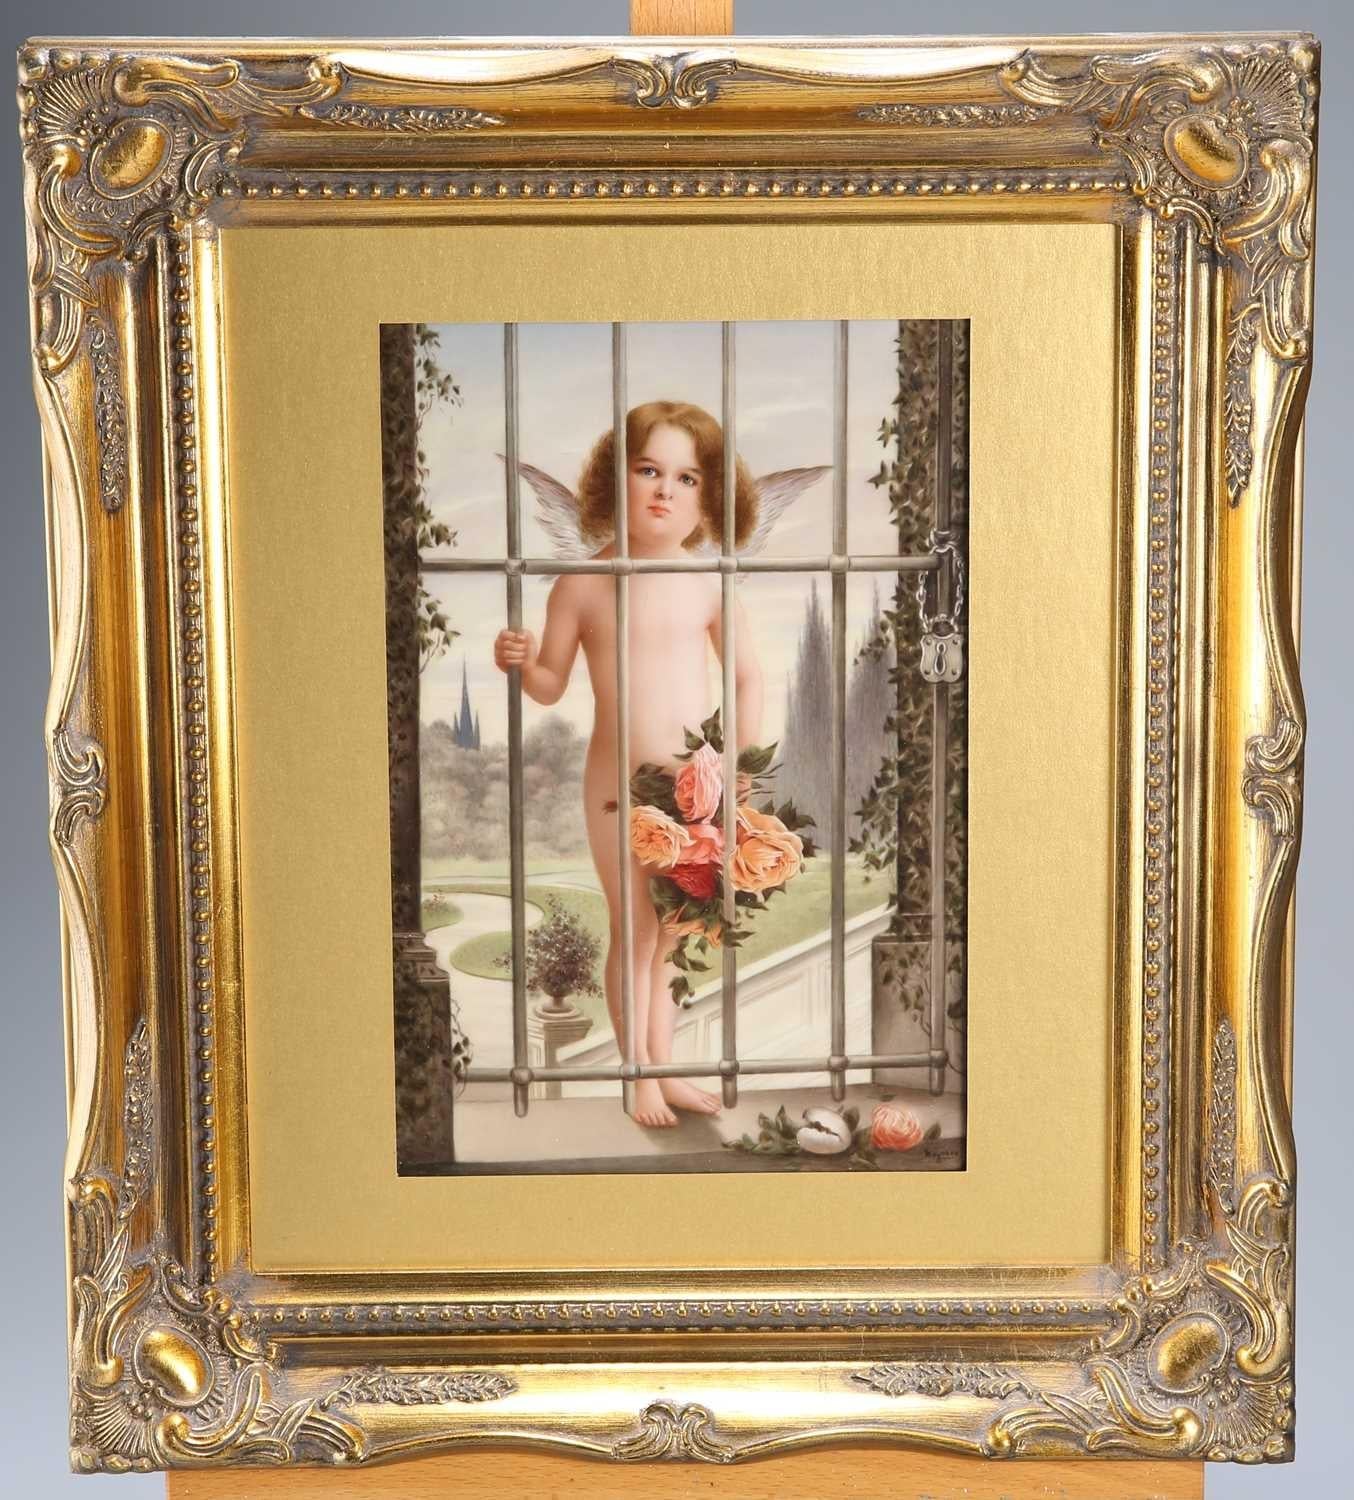 An allegorical winged cherub standing behind a locked gate with a bouquet of roses in his hand (symbolizing unrequited love). A rare and very finely-painted subject.

Impressed K.P.M and scepter marks, in gilt frame.

KPM is an acronym for